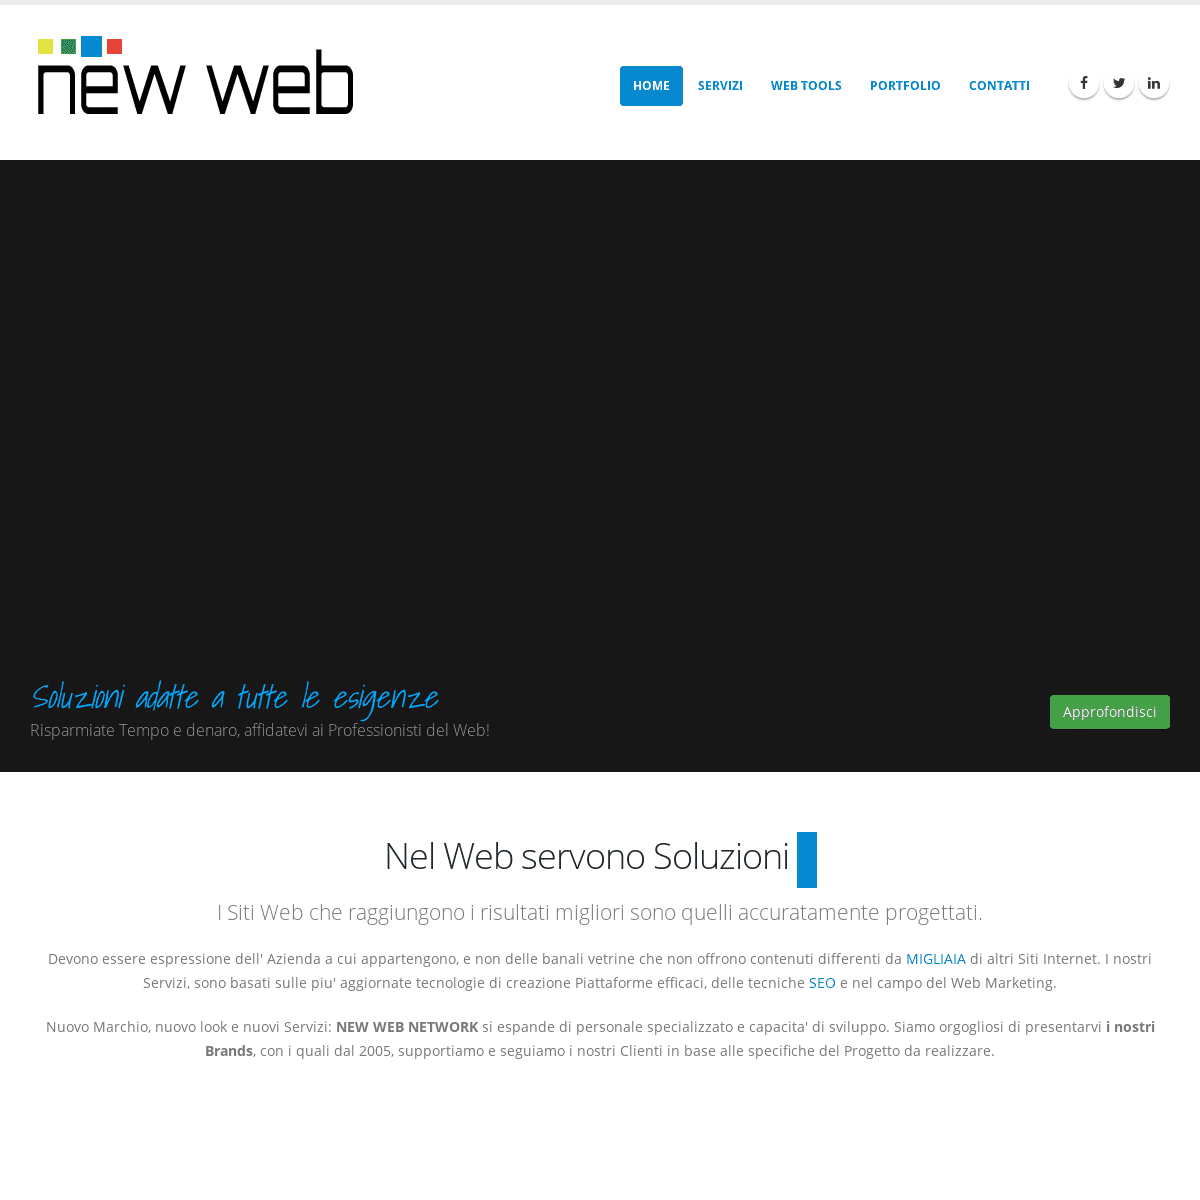 A complete backup of https://new-web.net